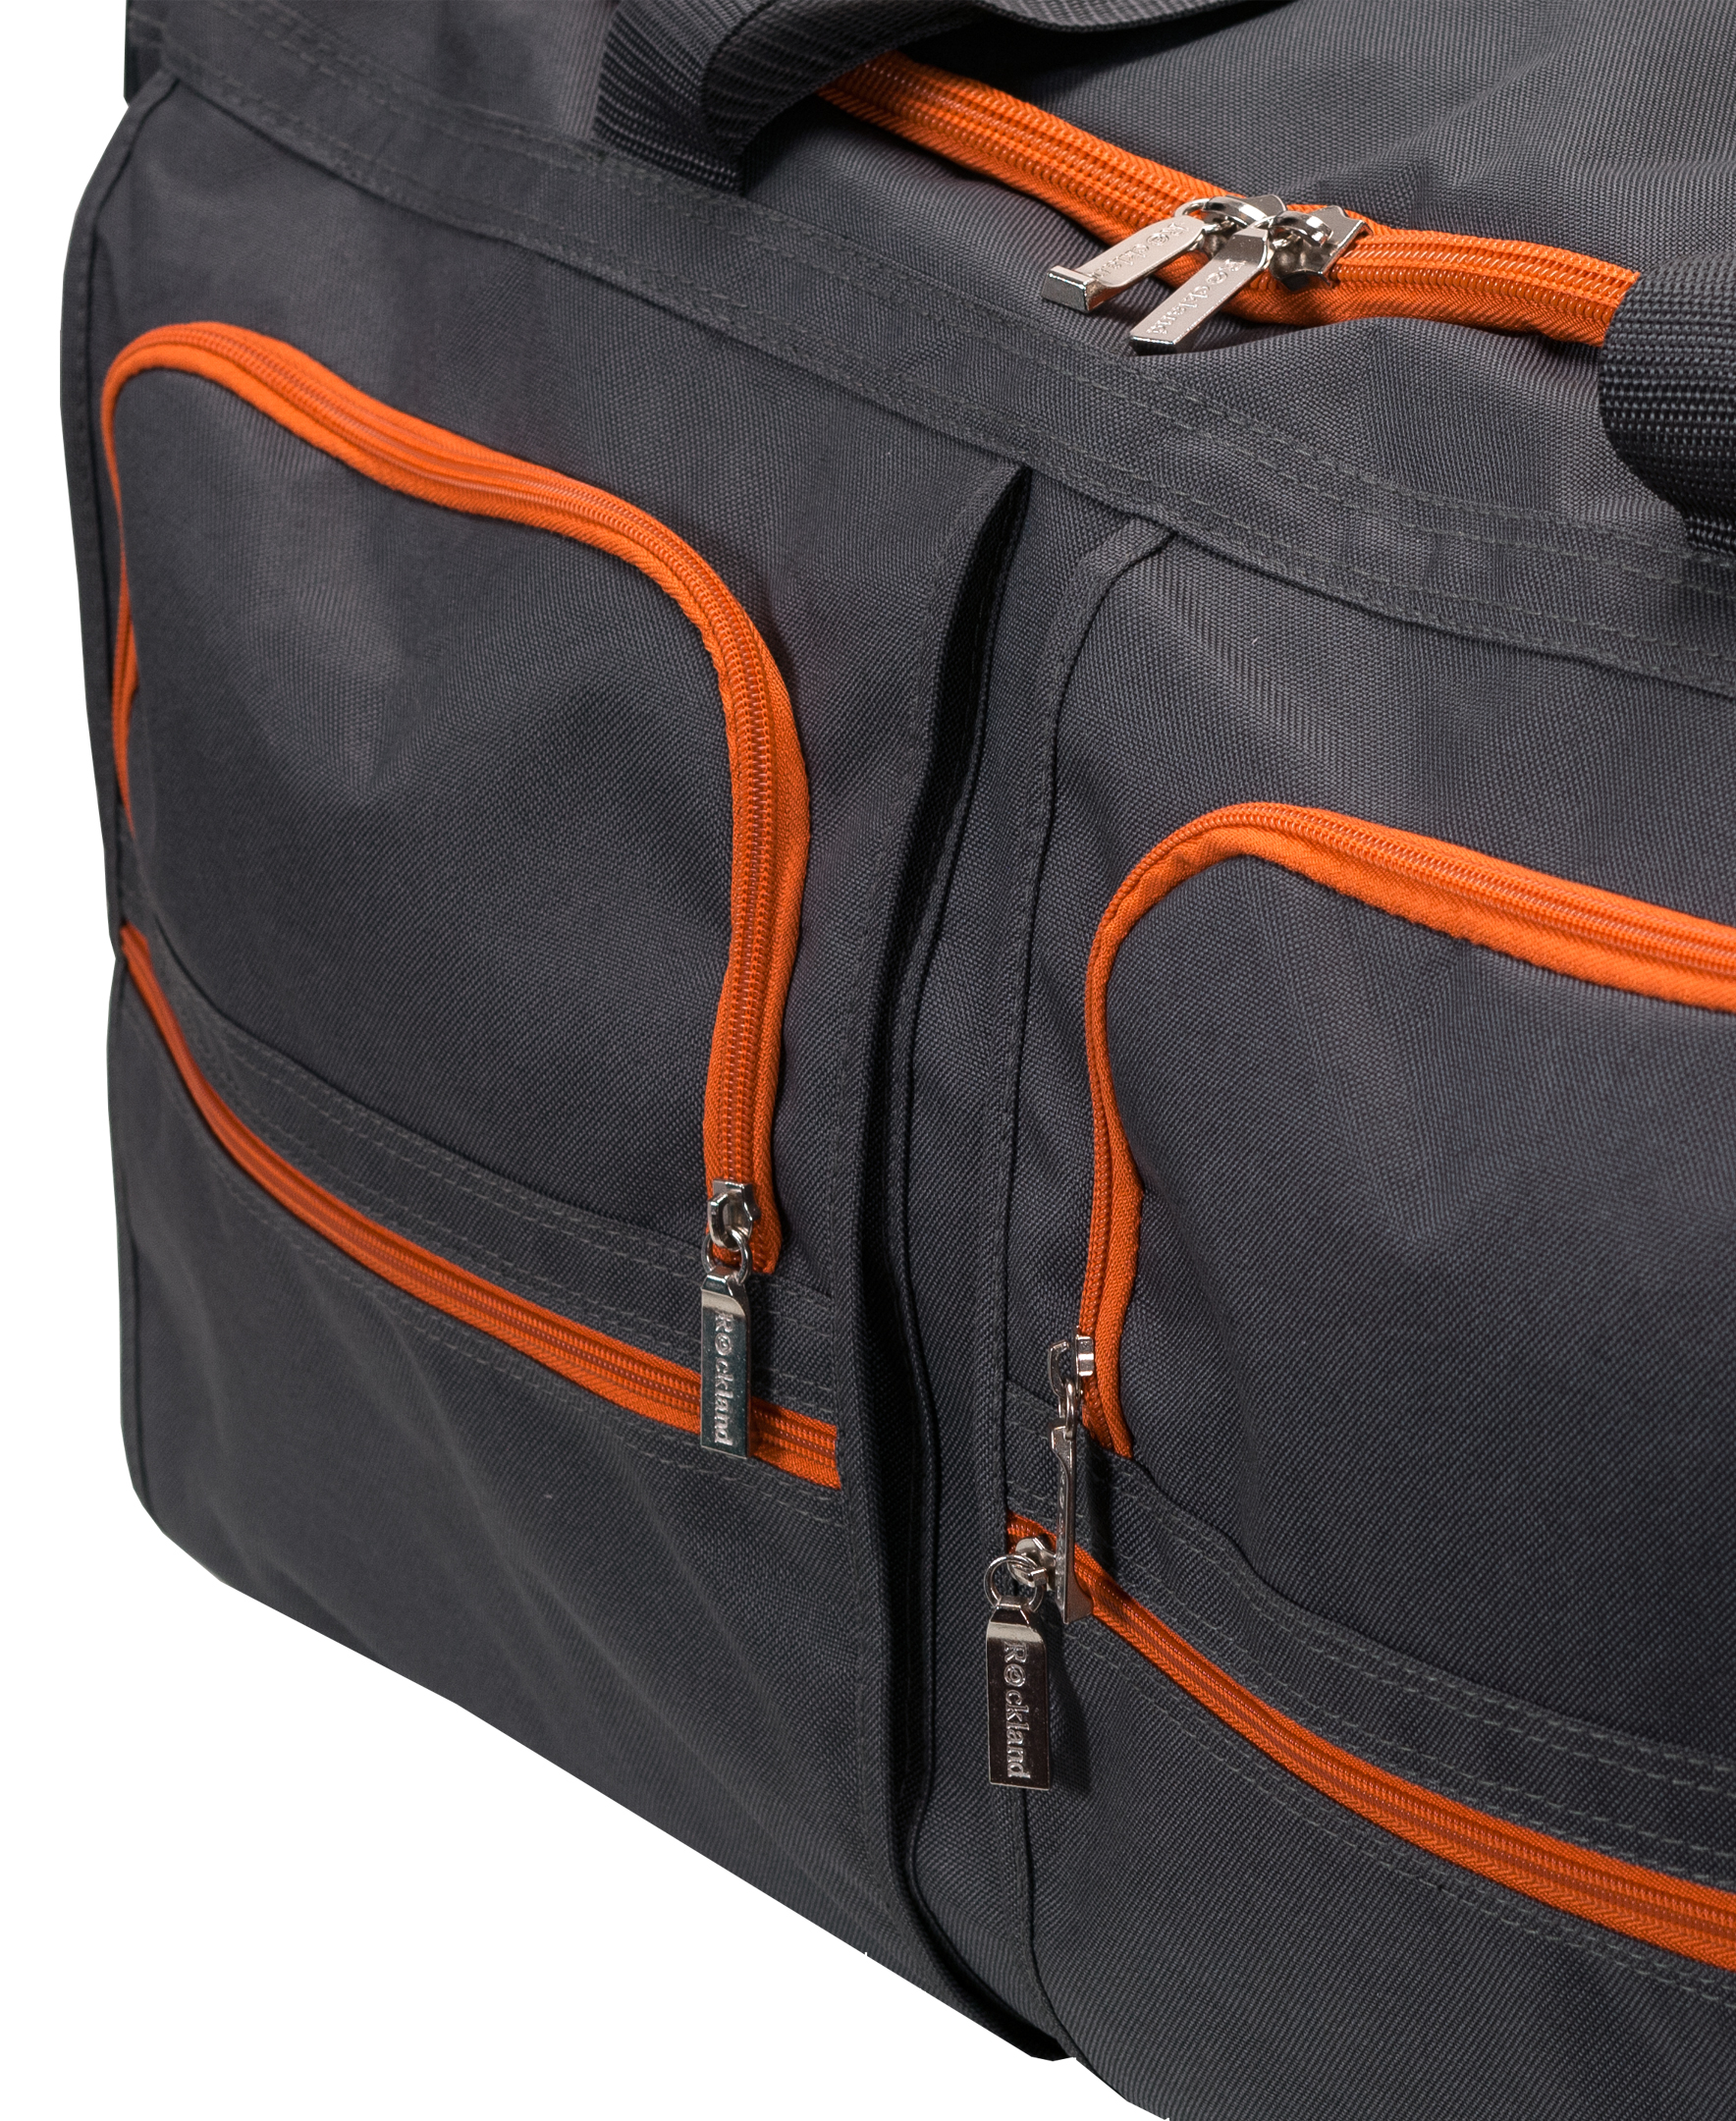 Rockland Luggage 30" Rolling Duffle Bag PRD330 - image 3 of 5